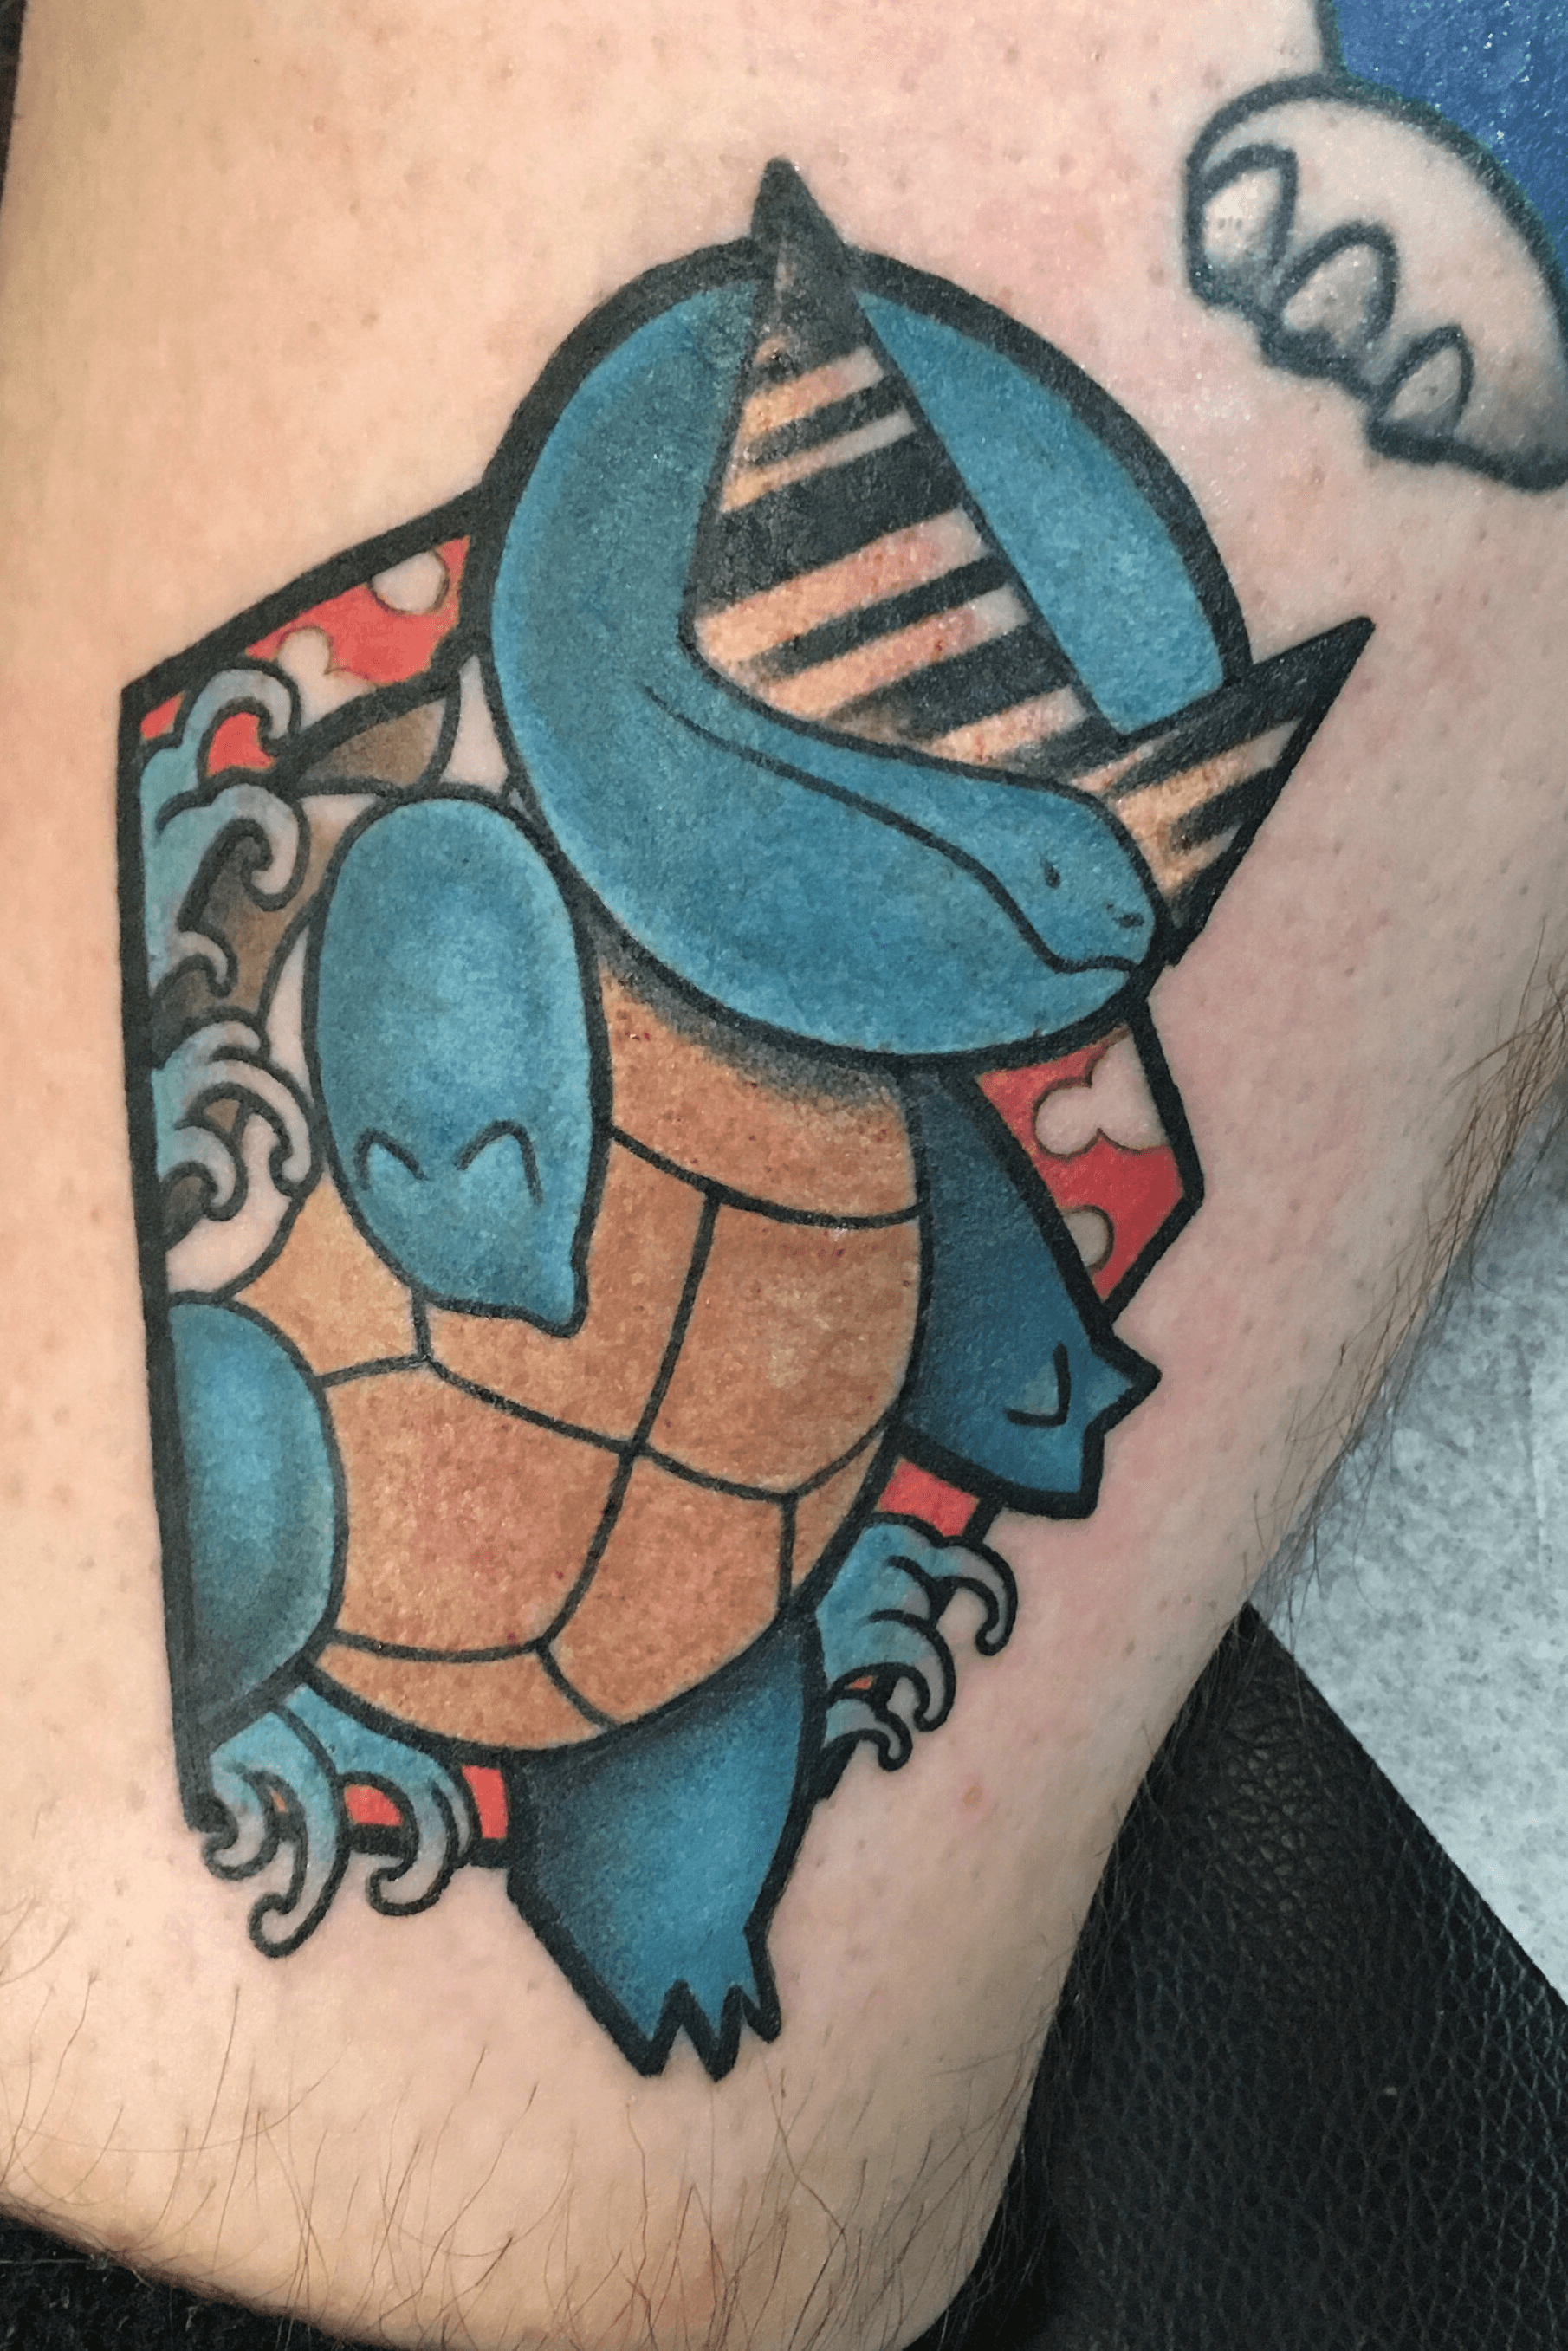 Amelia  Pokémon  Fun Tattoos on Instagram Beerdrinkin Squirtle squad  member got SO much love on timtom thanks yall More Pokemon doing fun  things please SquirtleSquad BeerMe              